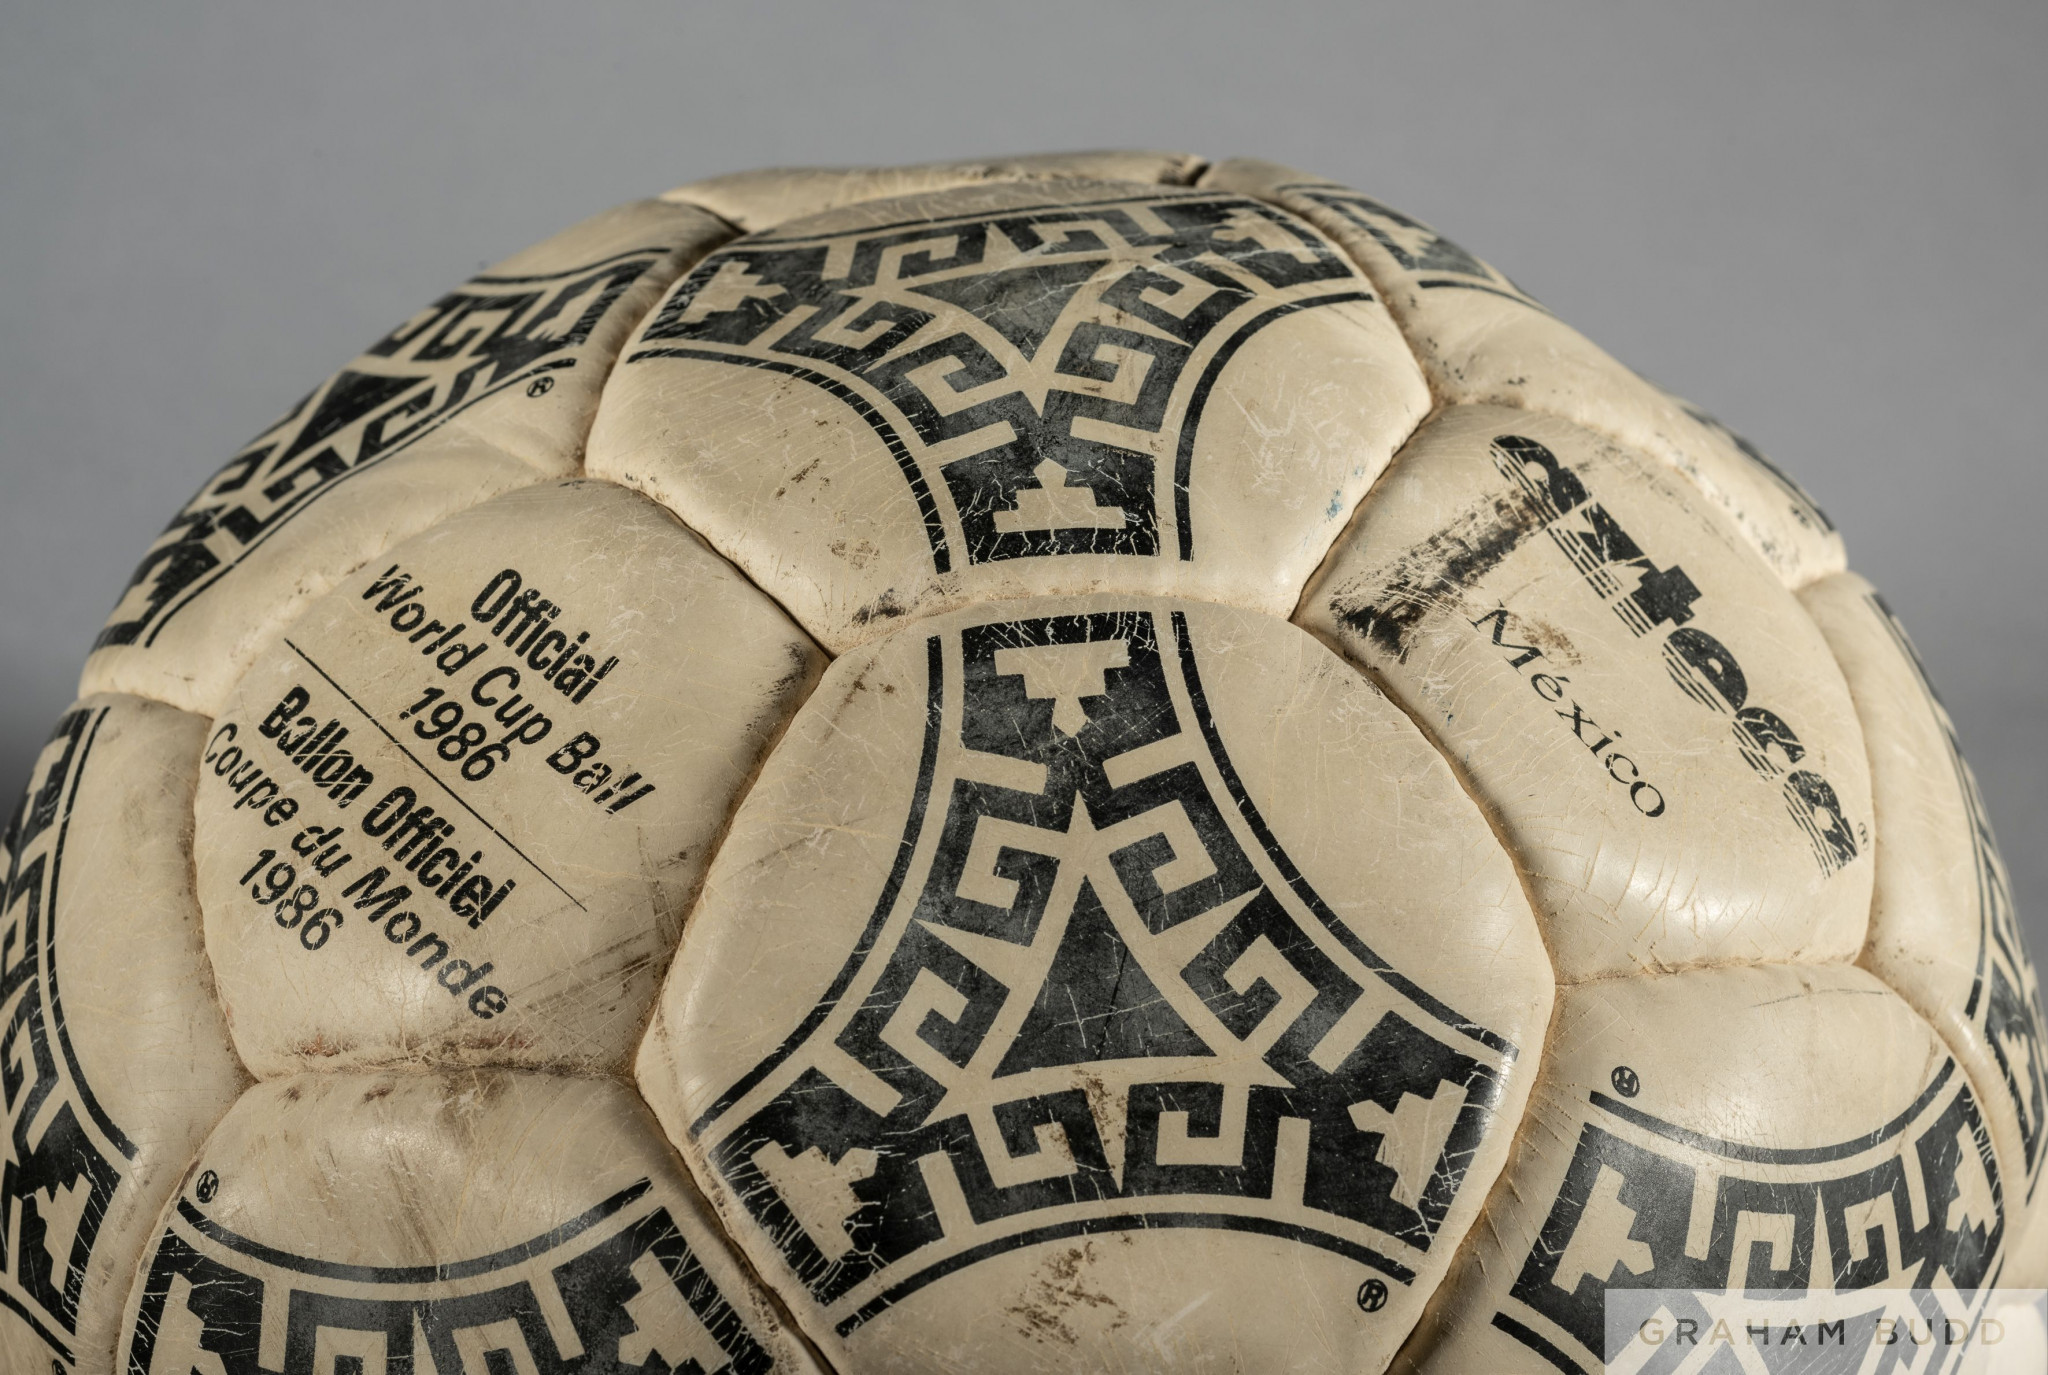 Graham Budd Auctions are selling the ball used in the 1986 FIFA World Cup final won by Argentina 3-2 against West Germany in Mexico City ©Graham Budd Auctions